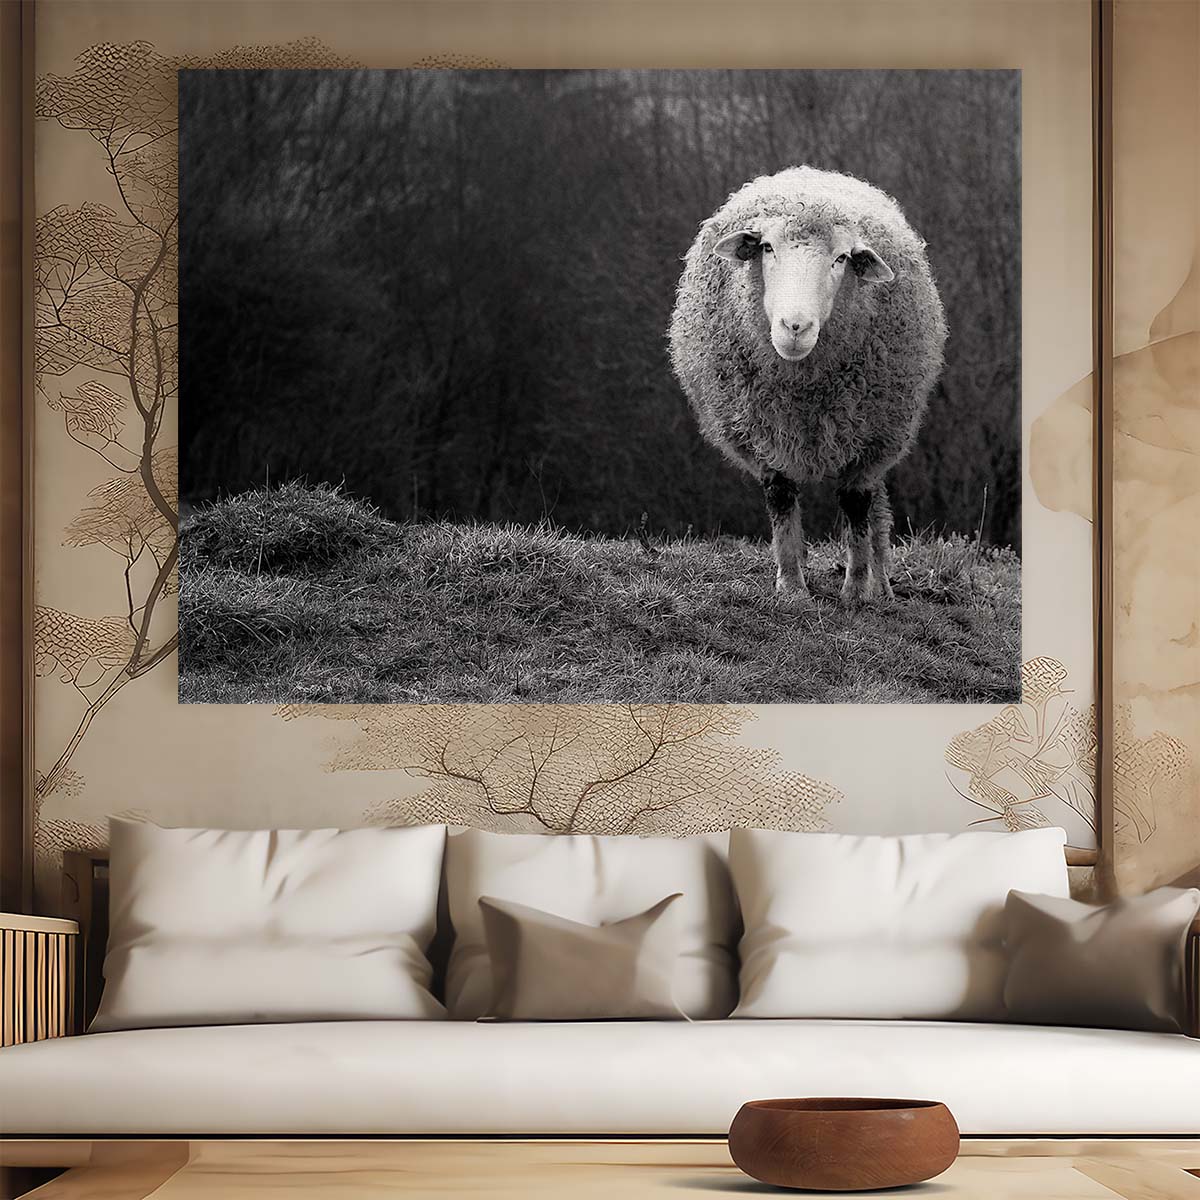 Pastoral Sheep in Monochrome Field Farmhouse Wall Art by Luxuriance Designs. Made in USA.